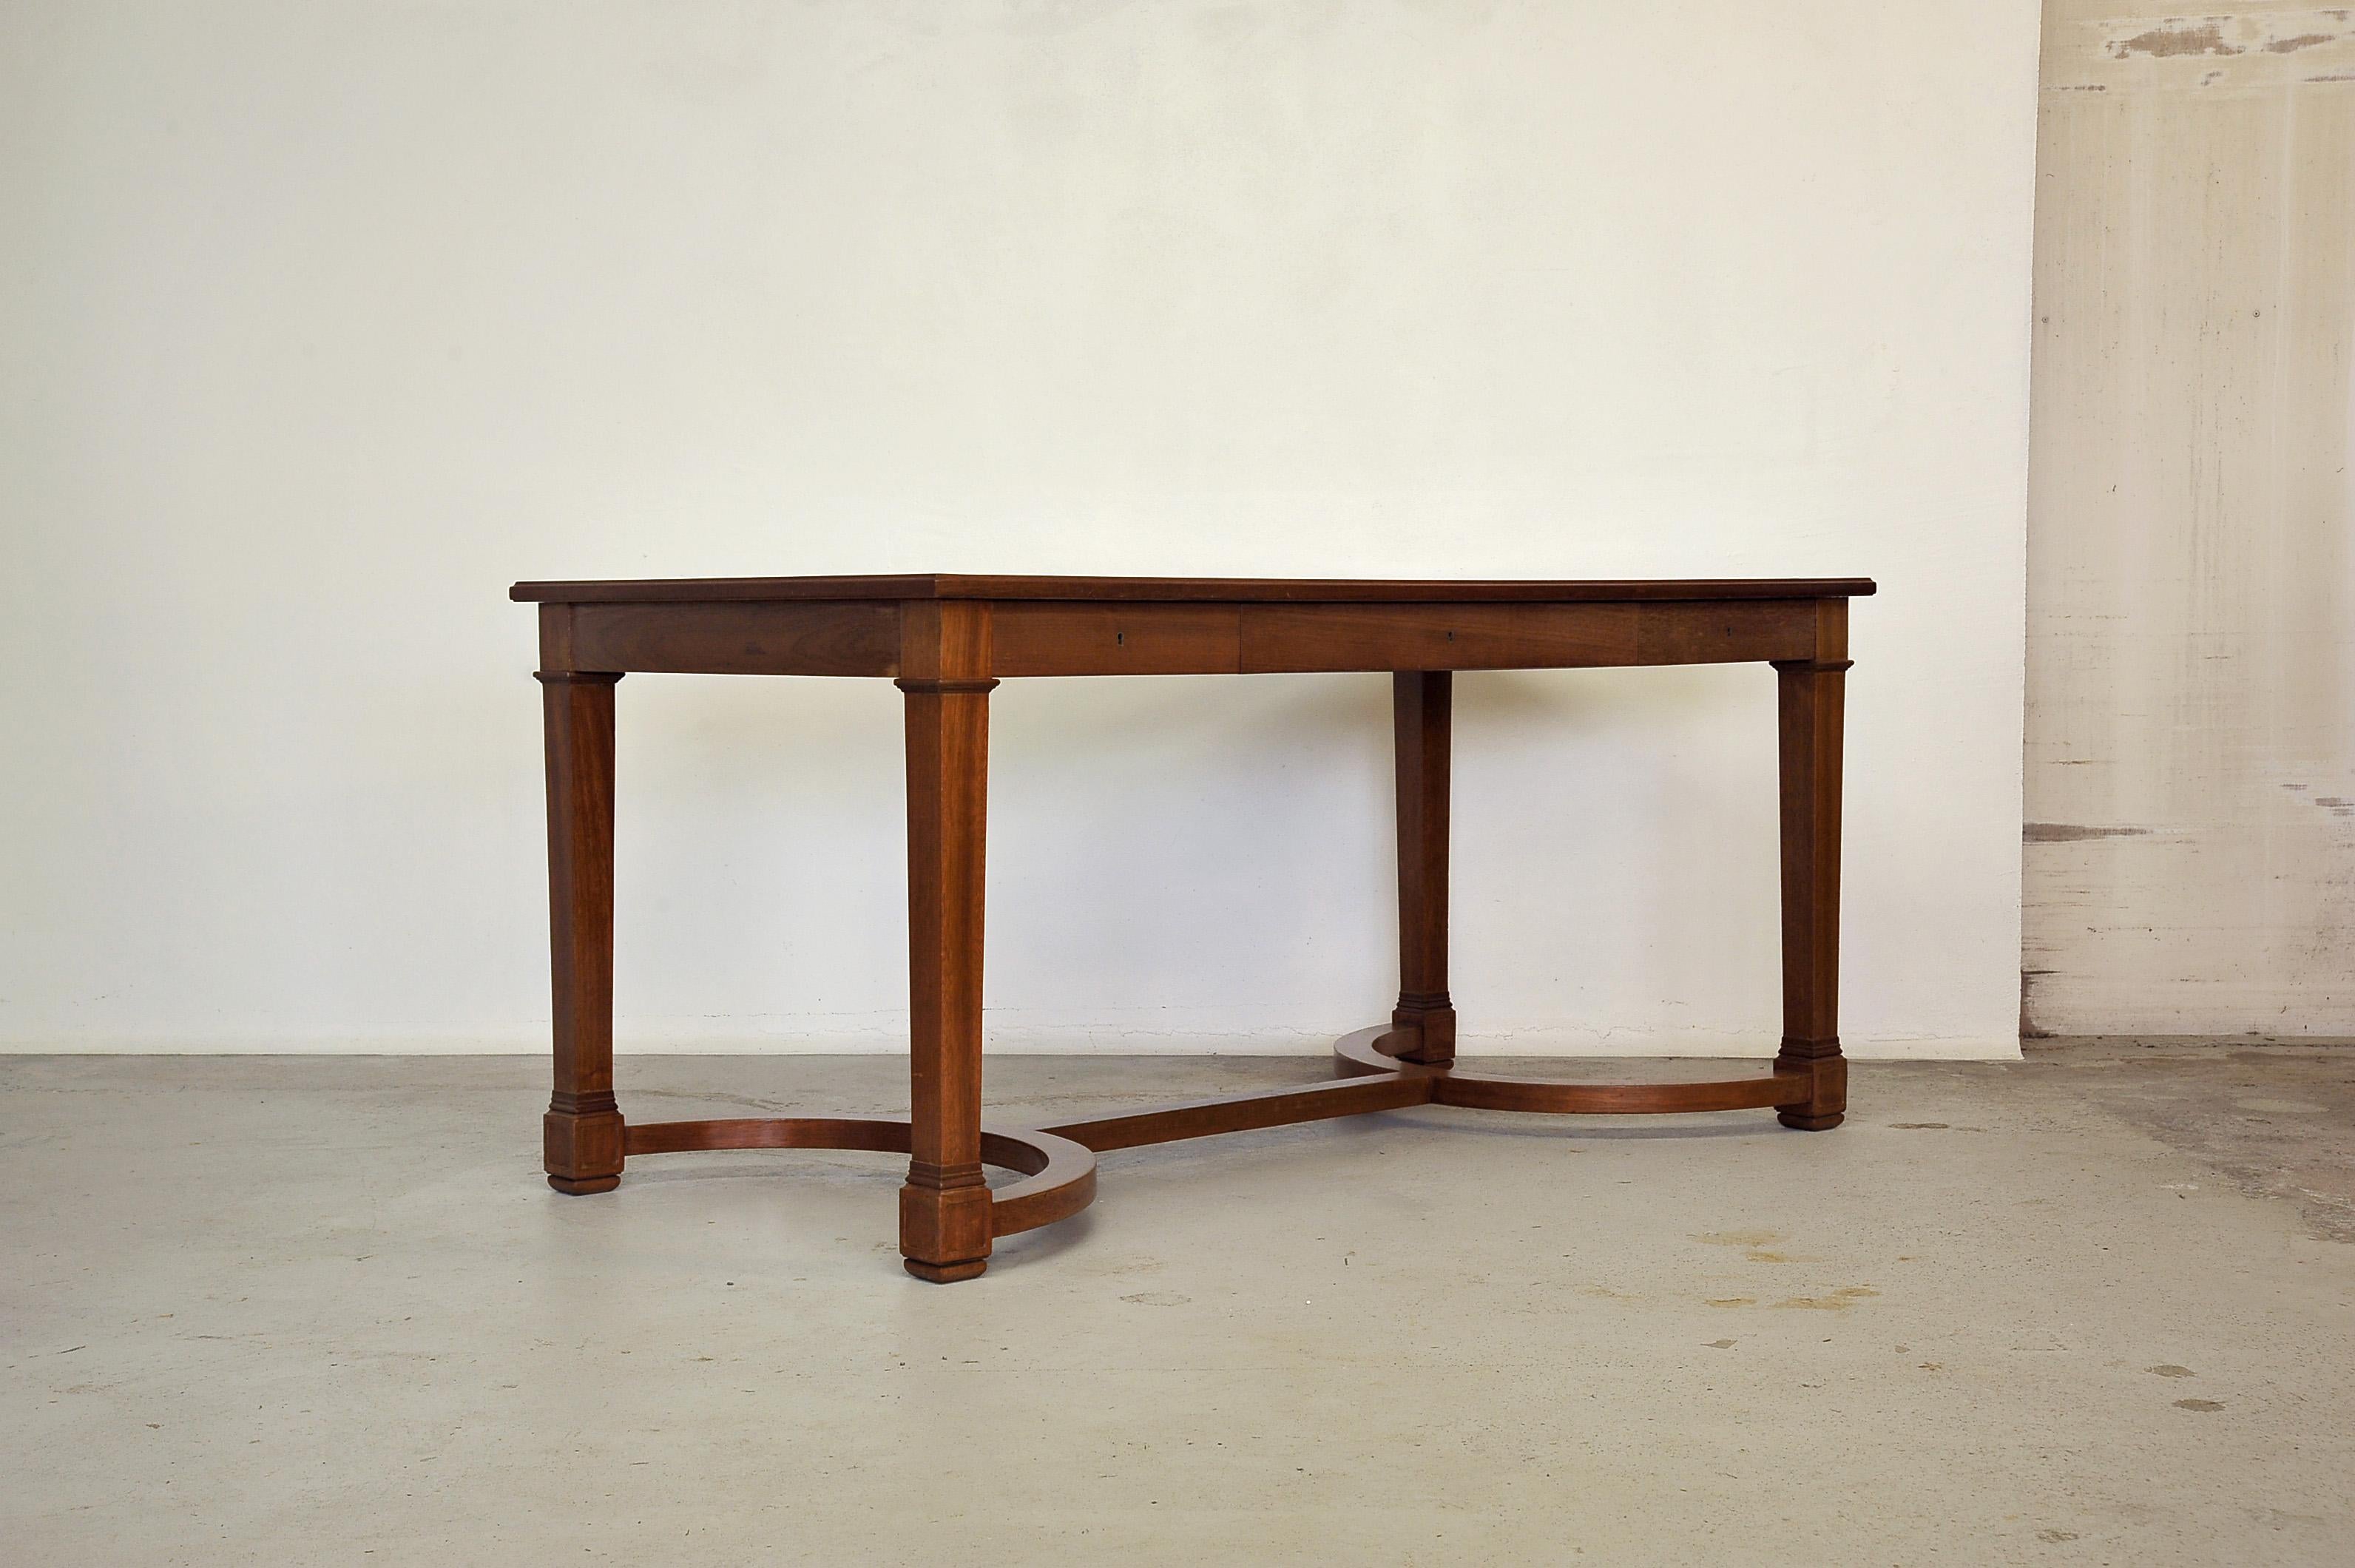 Mid-20th Century Neoclassical Mahogany and Leather Desk in the Style of André Arbus, France 1940s